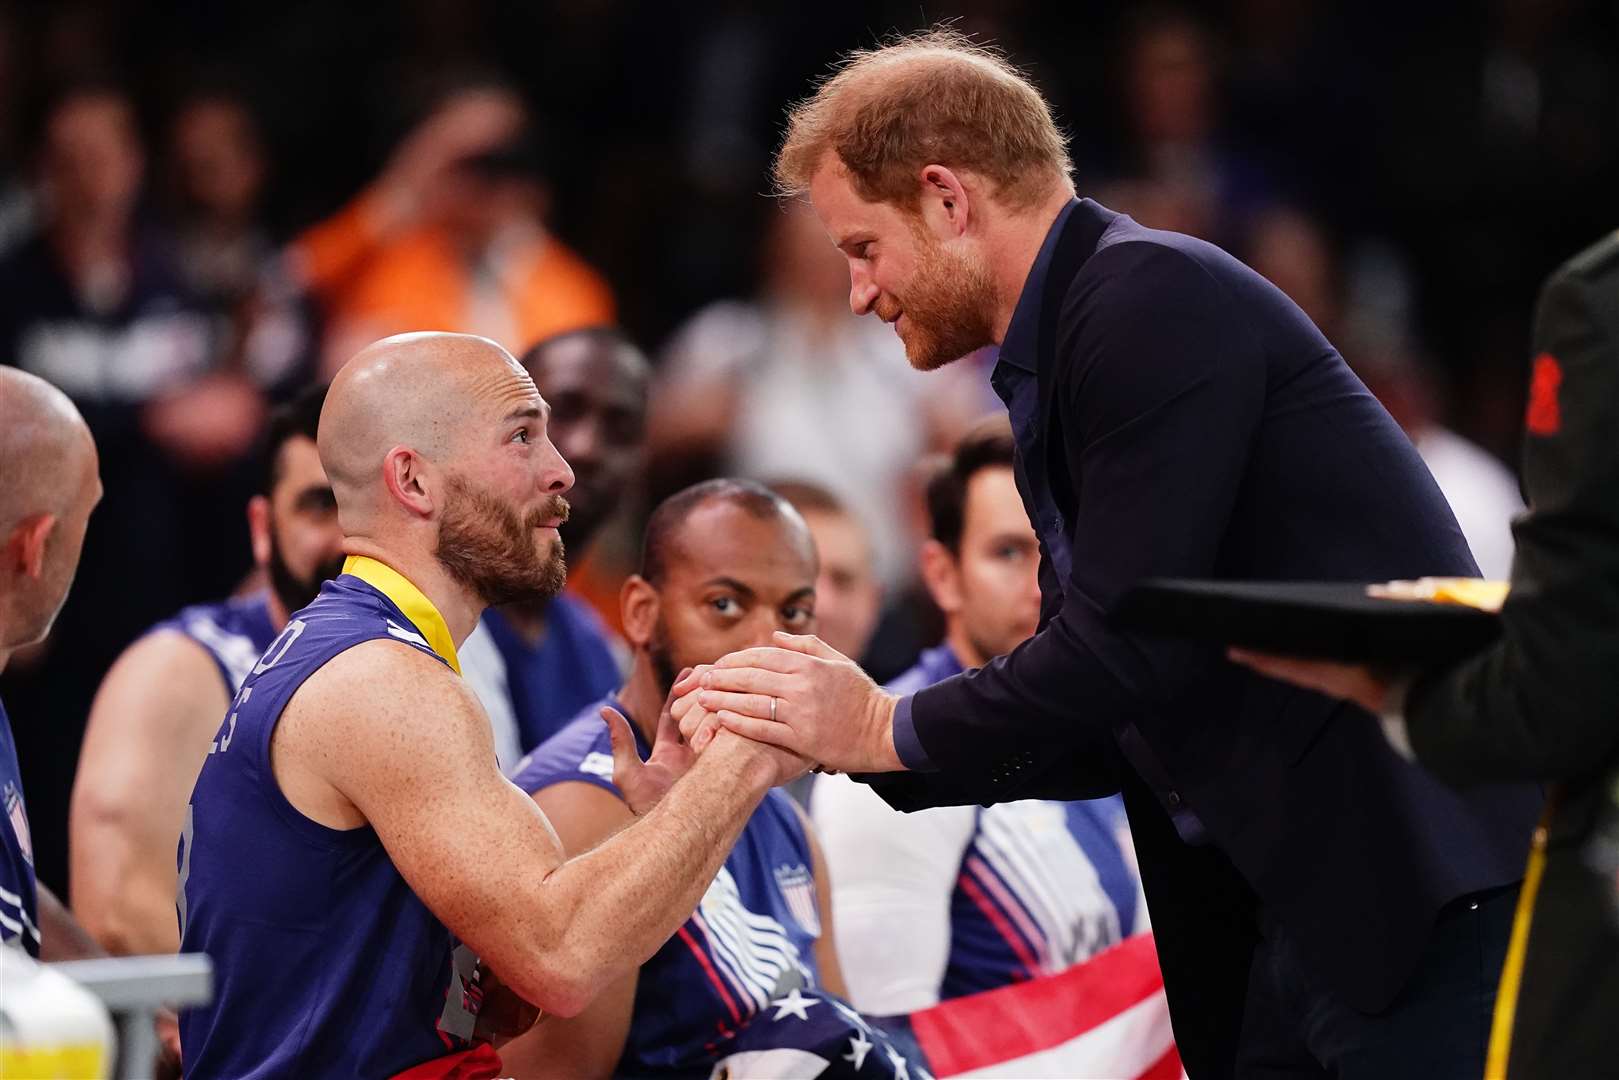 The Duke of Sussex at the wheelchair basketball final, during the Invictus Games in The Hague (Aaron Chown/PA)